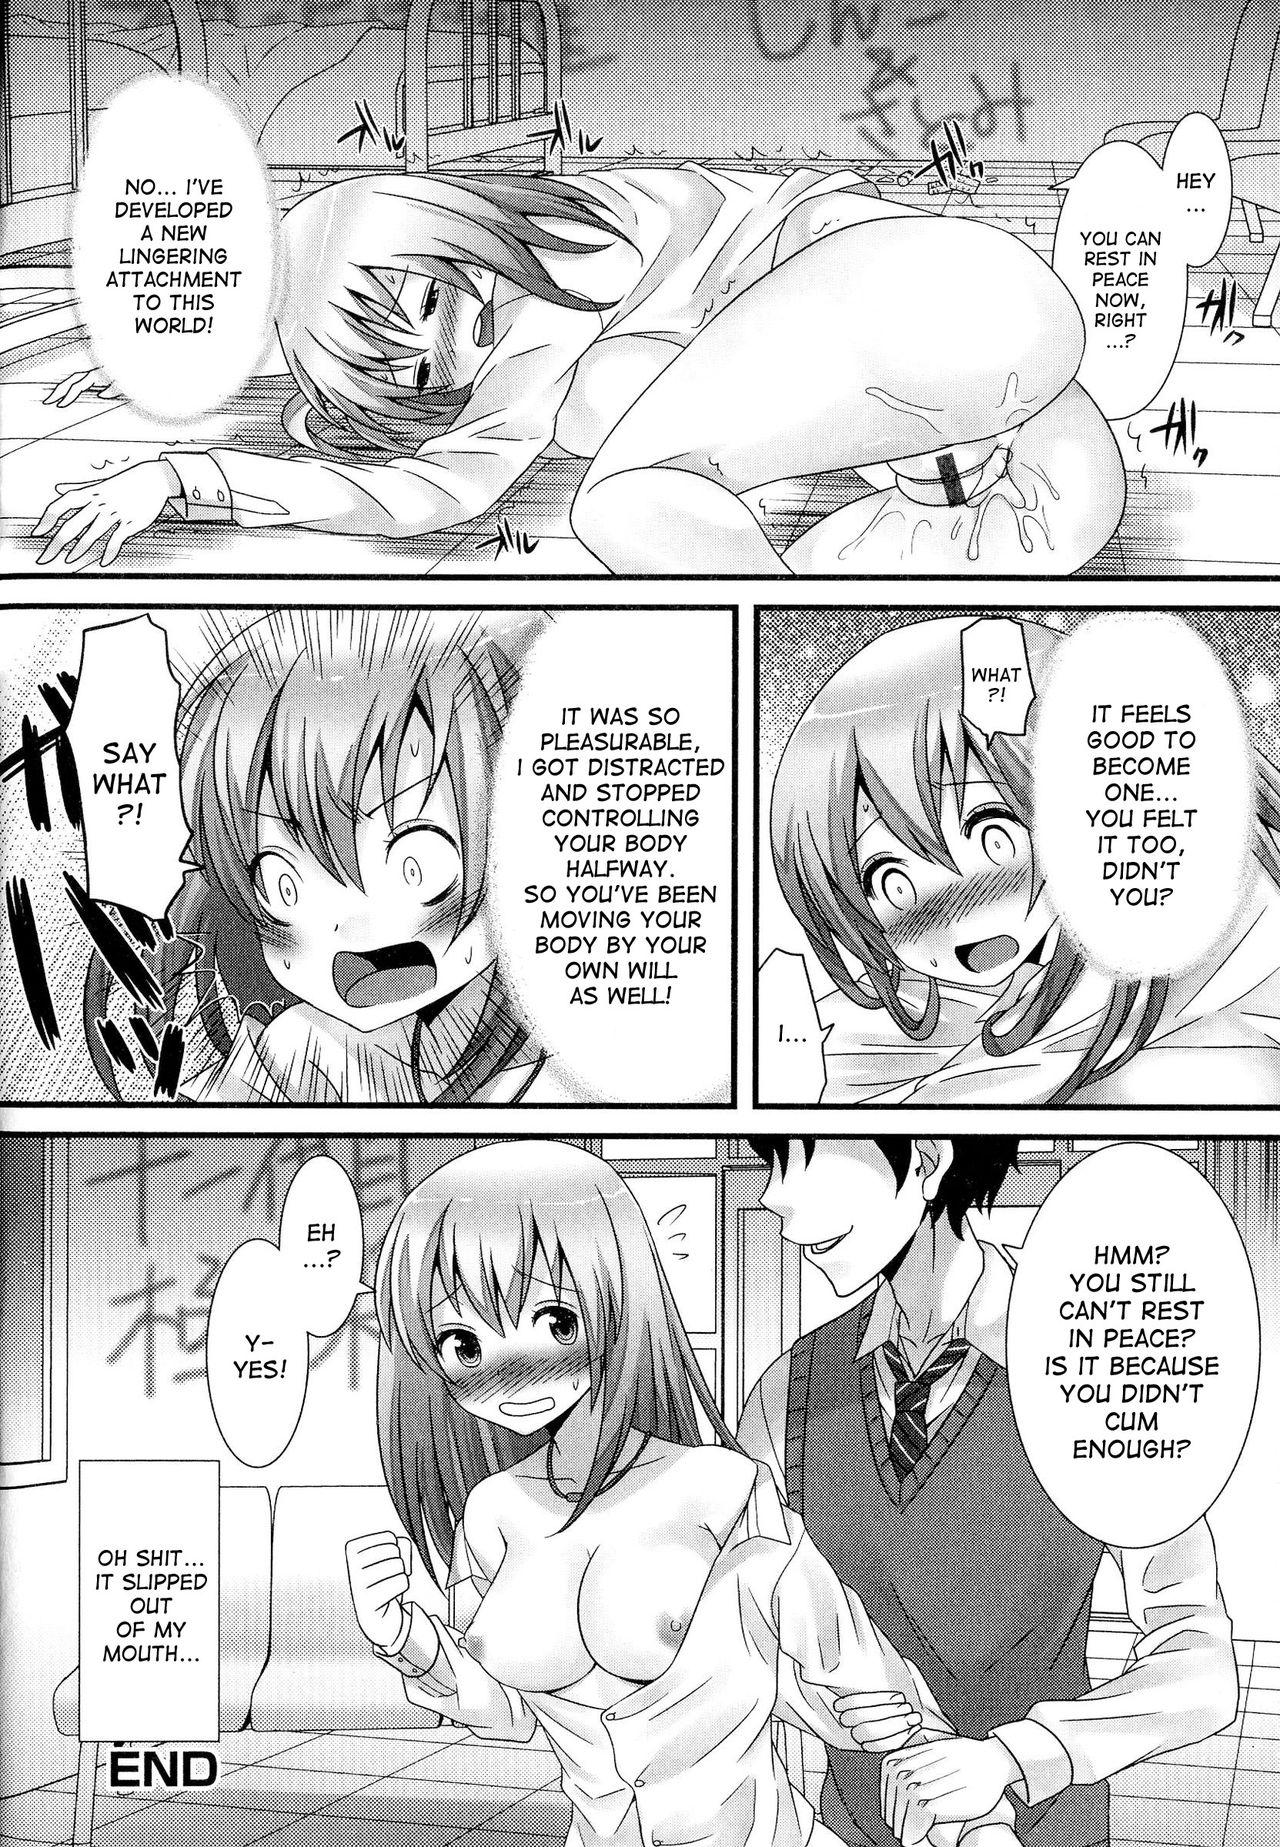 Freaky Koibito wa Yuurei!? | My Lover is a Ghost?! Culo - Page 16